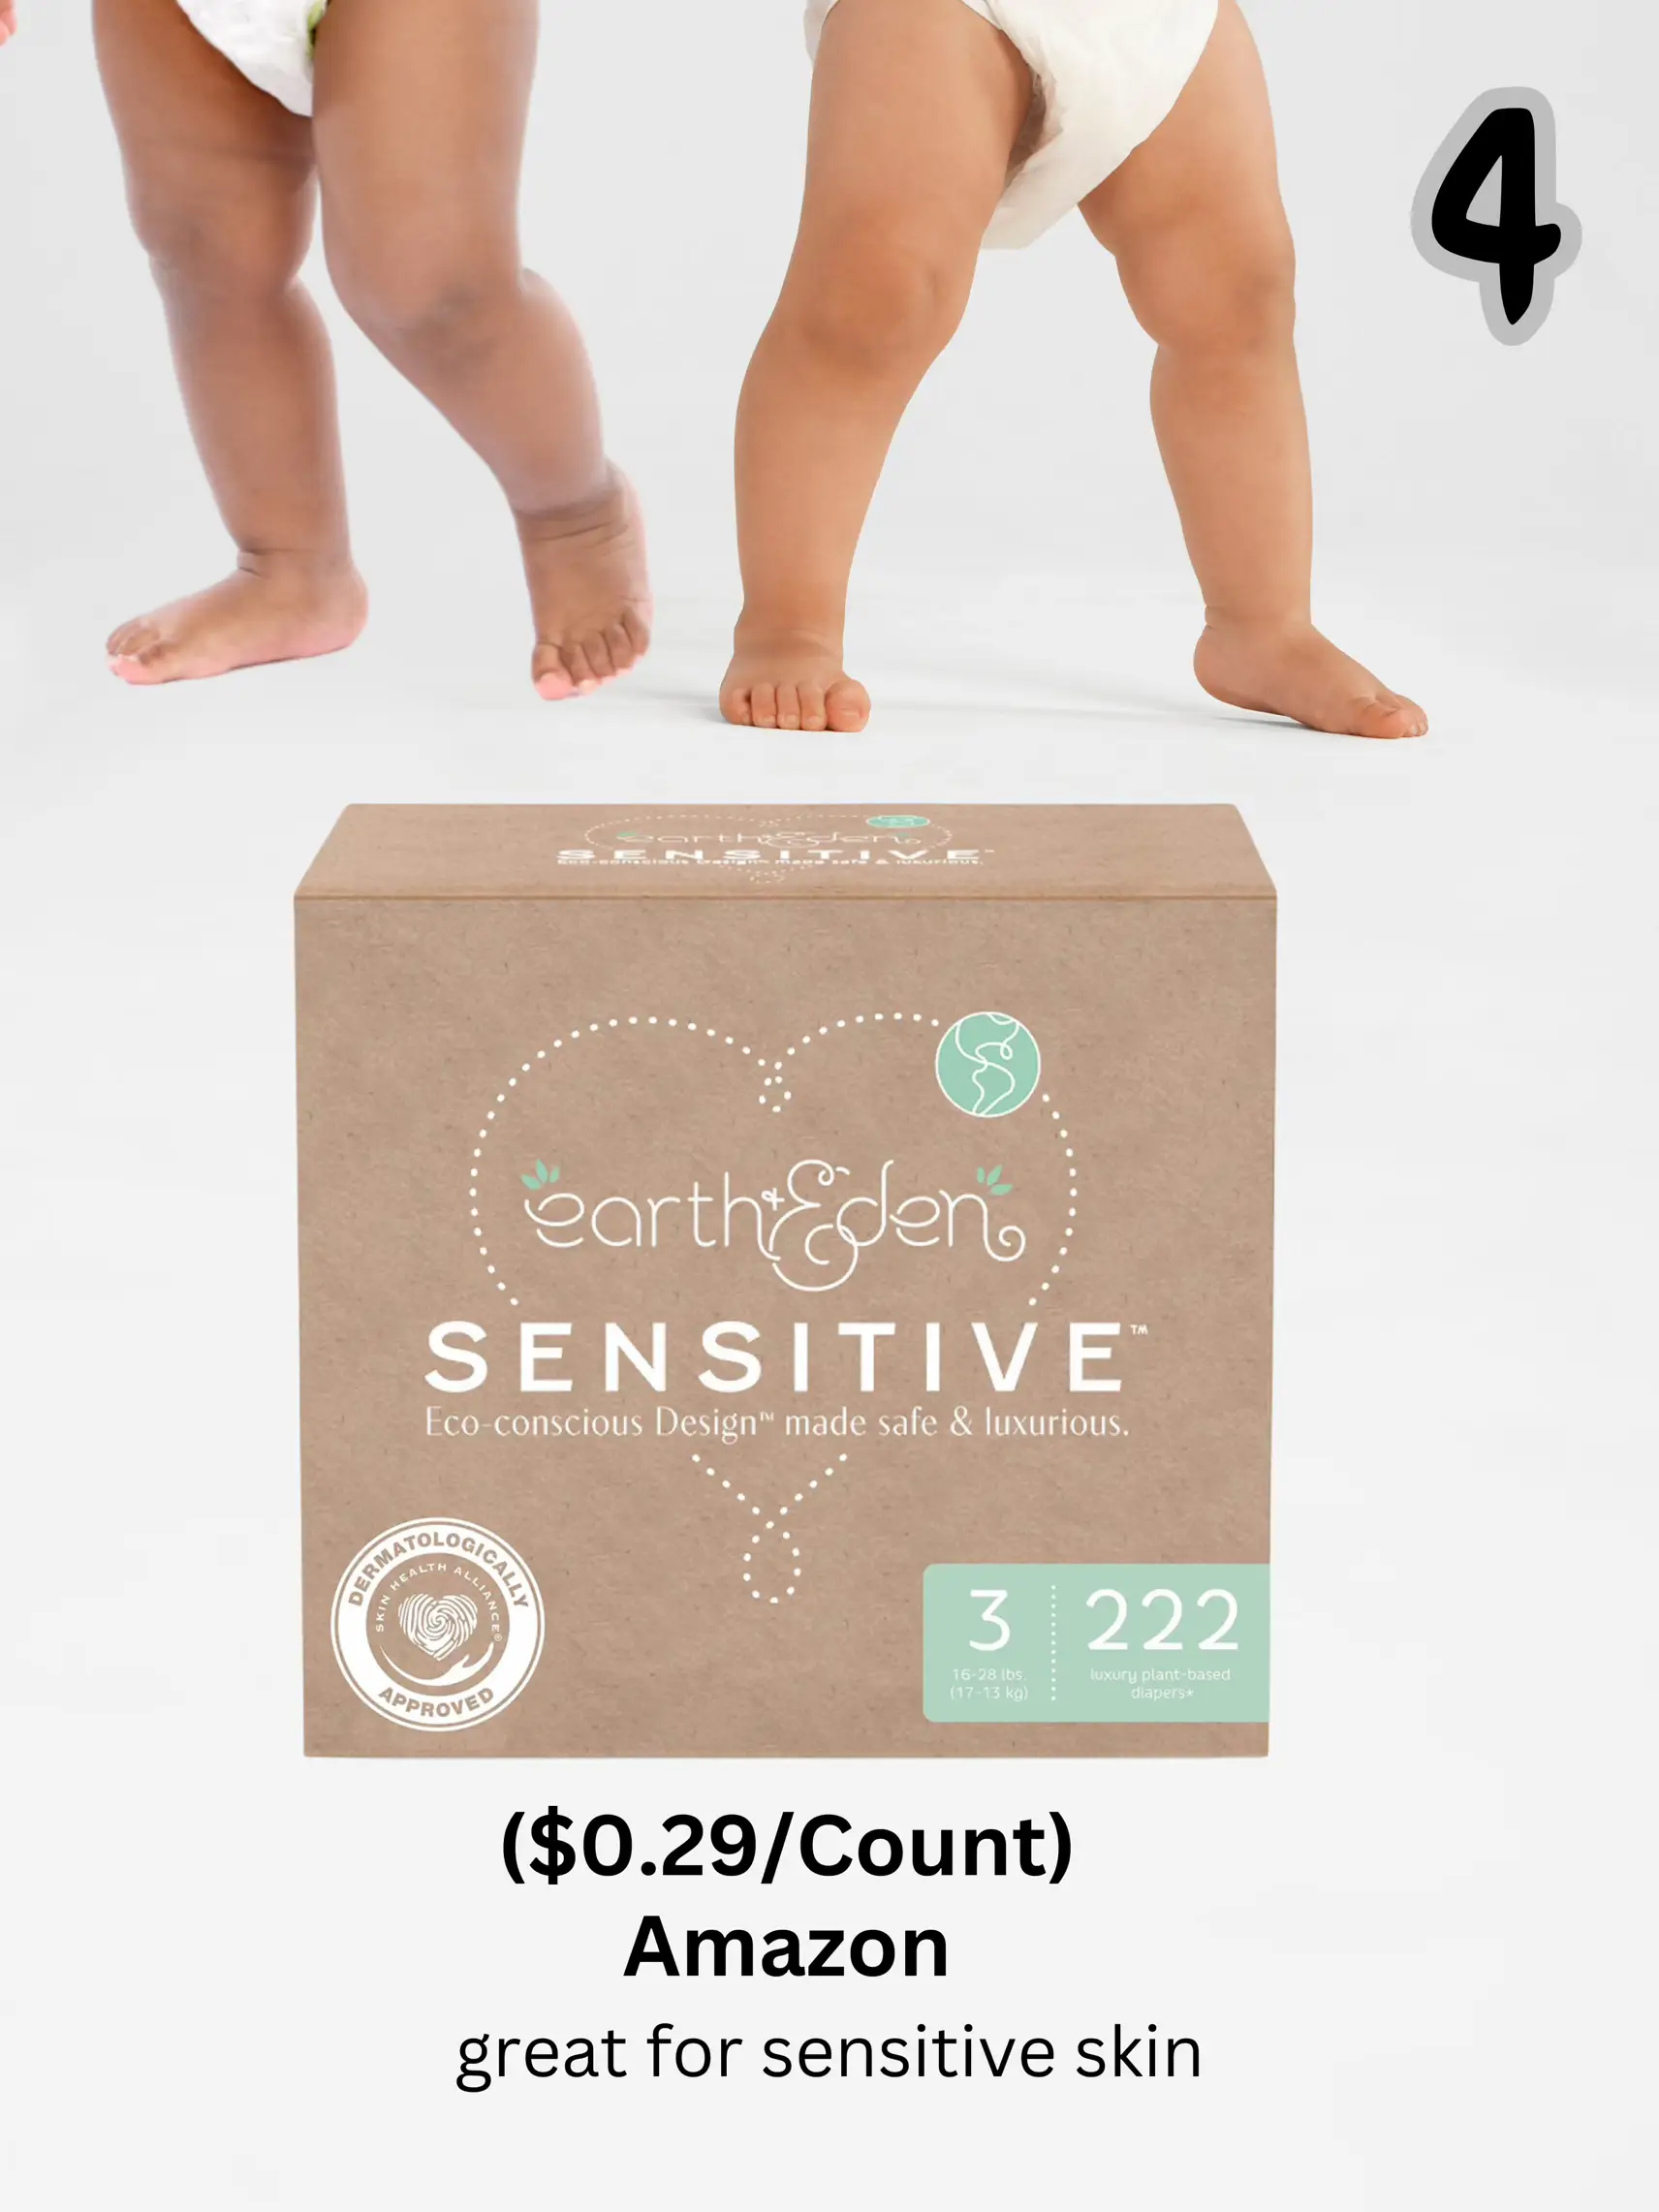 The TikTok viral diaper brand adored by moms adds 800 additional